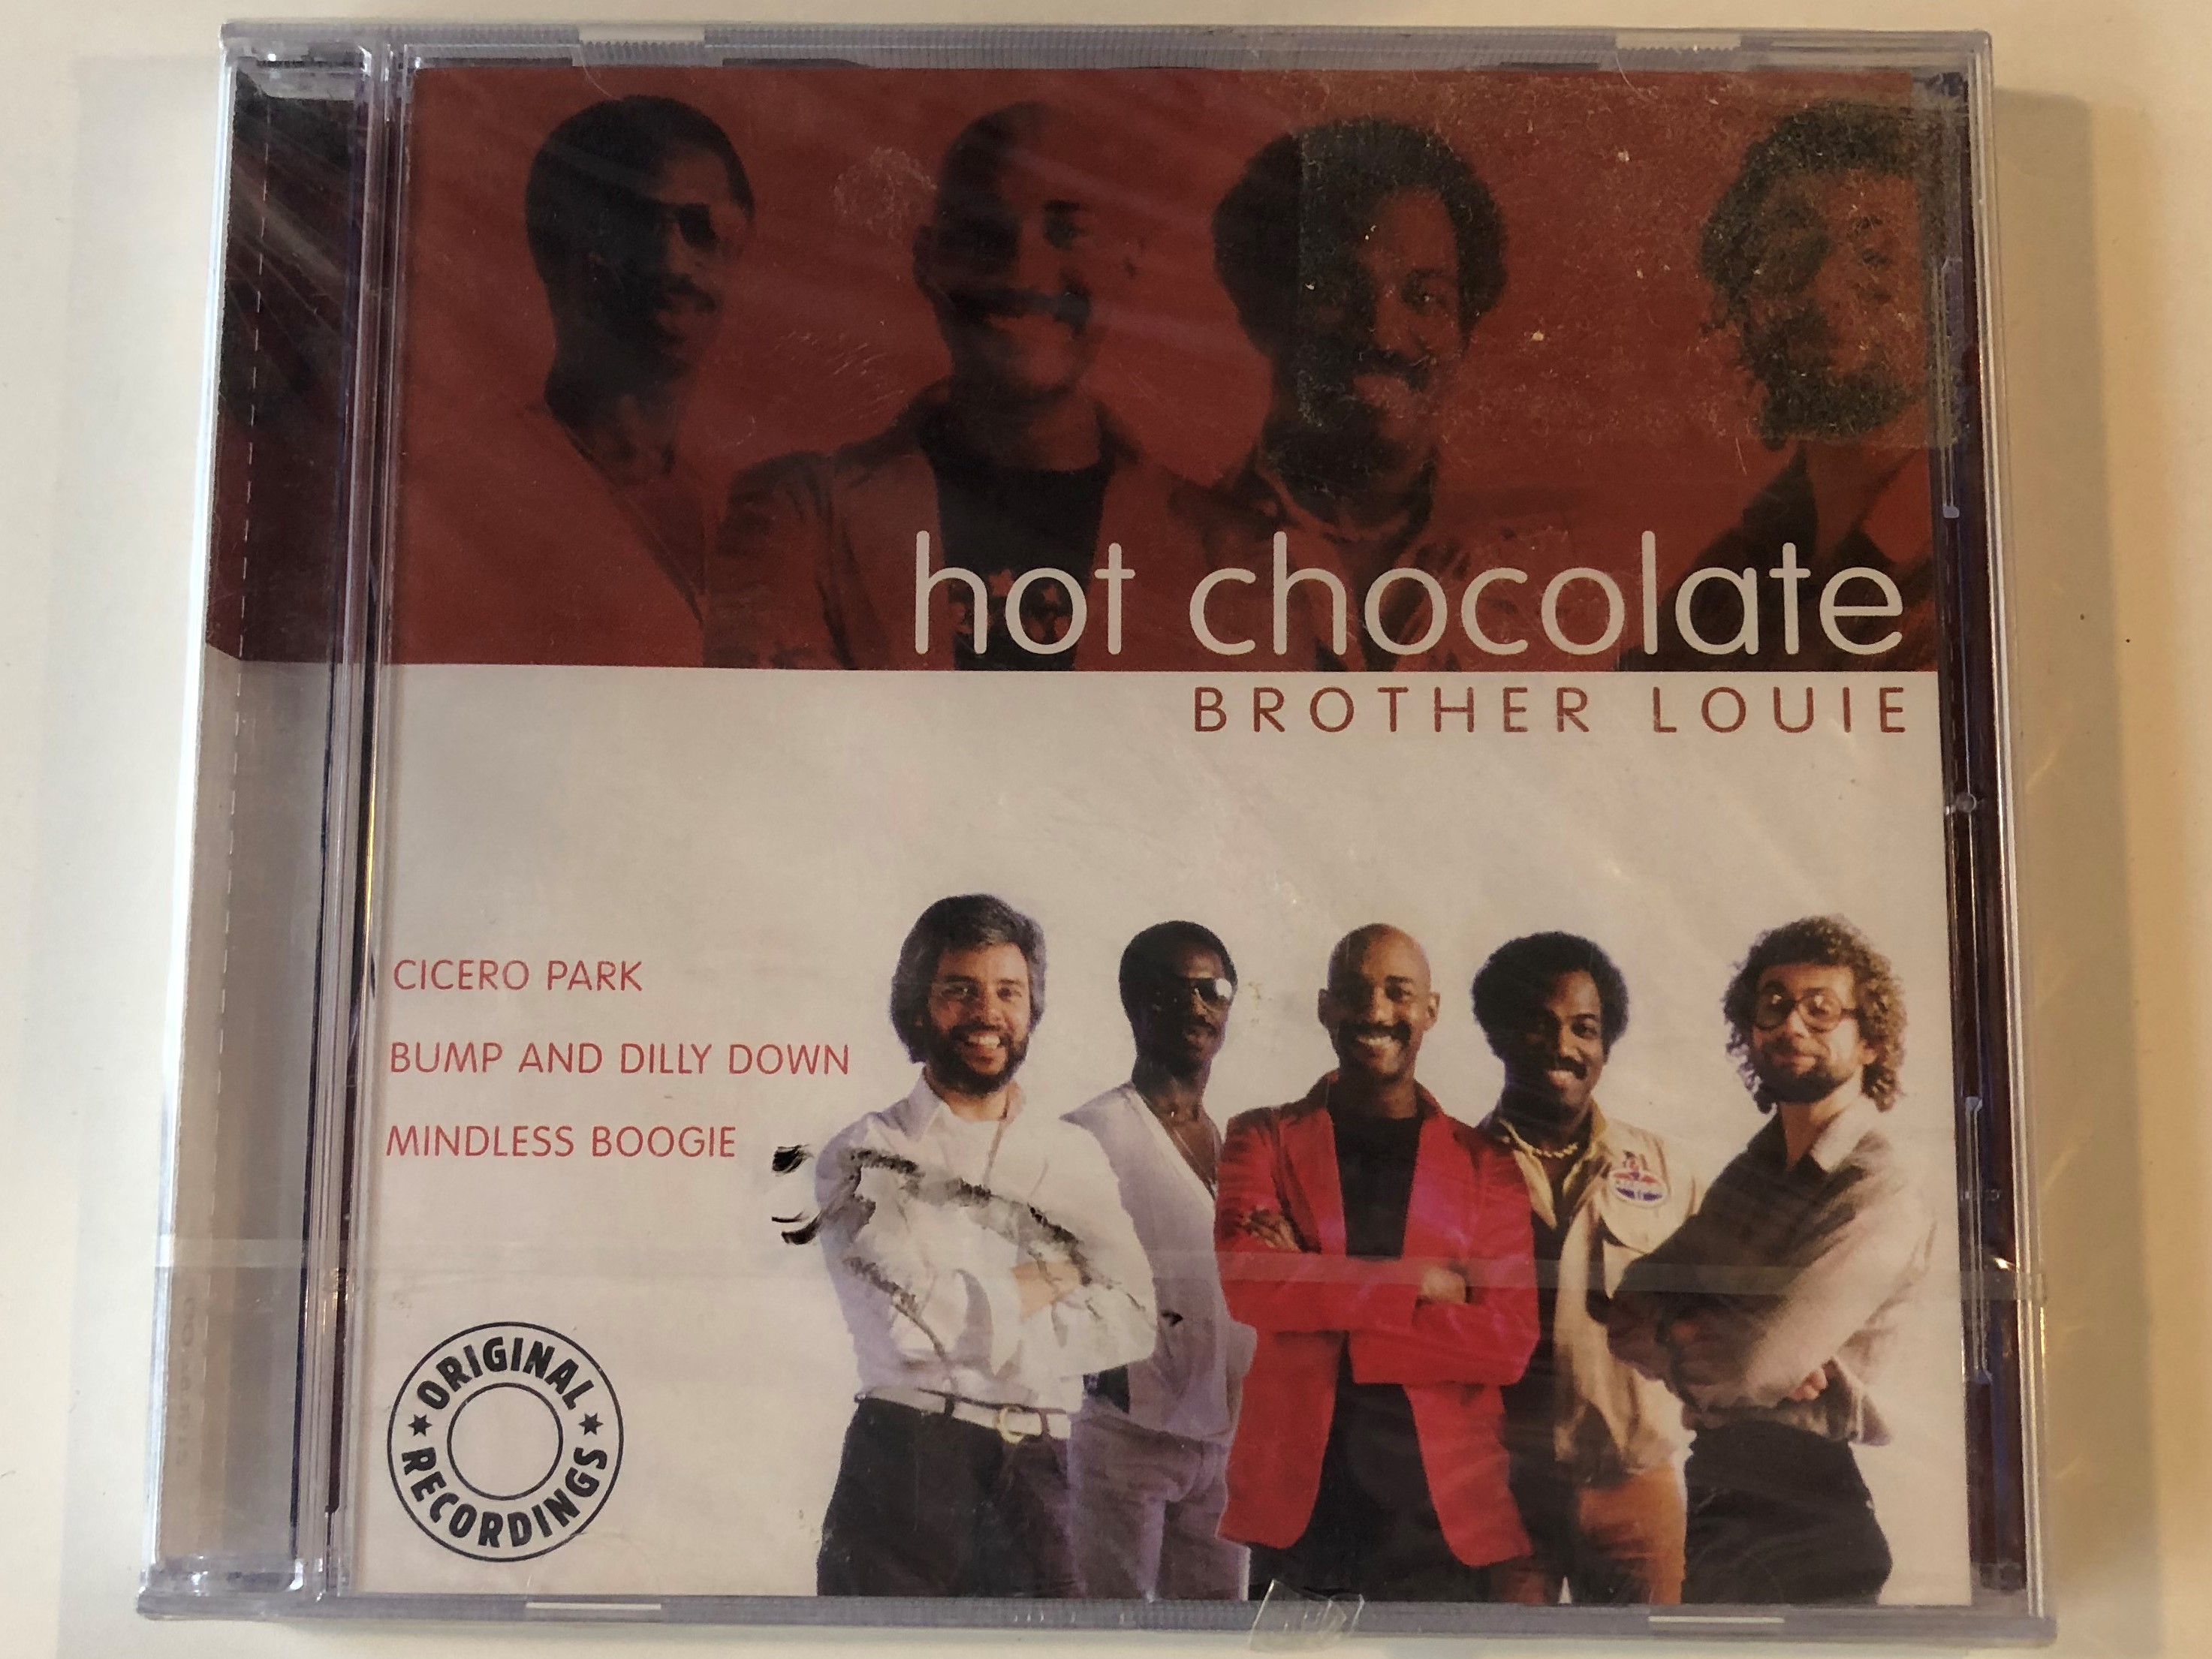 hot-chocolate-brother-louie-cicero-park-bump-and-dilly-down-mindless-boogie-pure-gold-audio-cd-2002-go-793512-1-.jpg